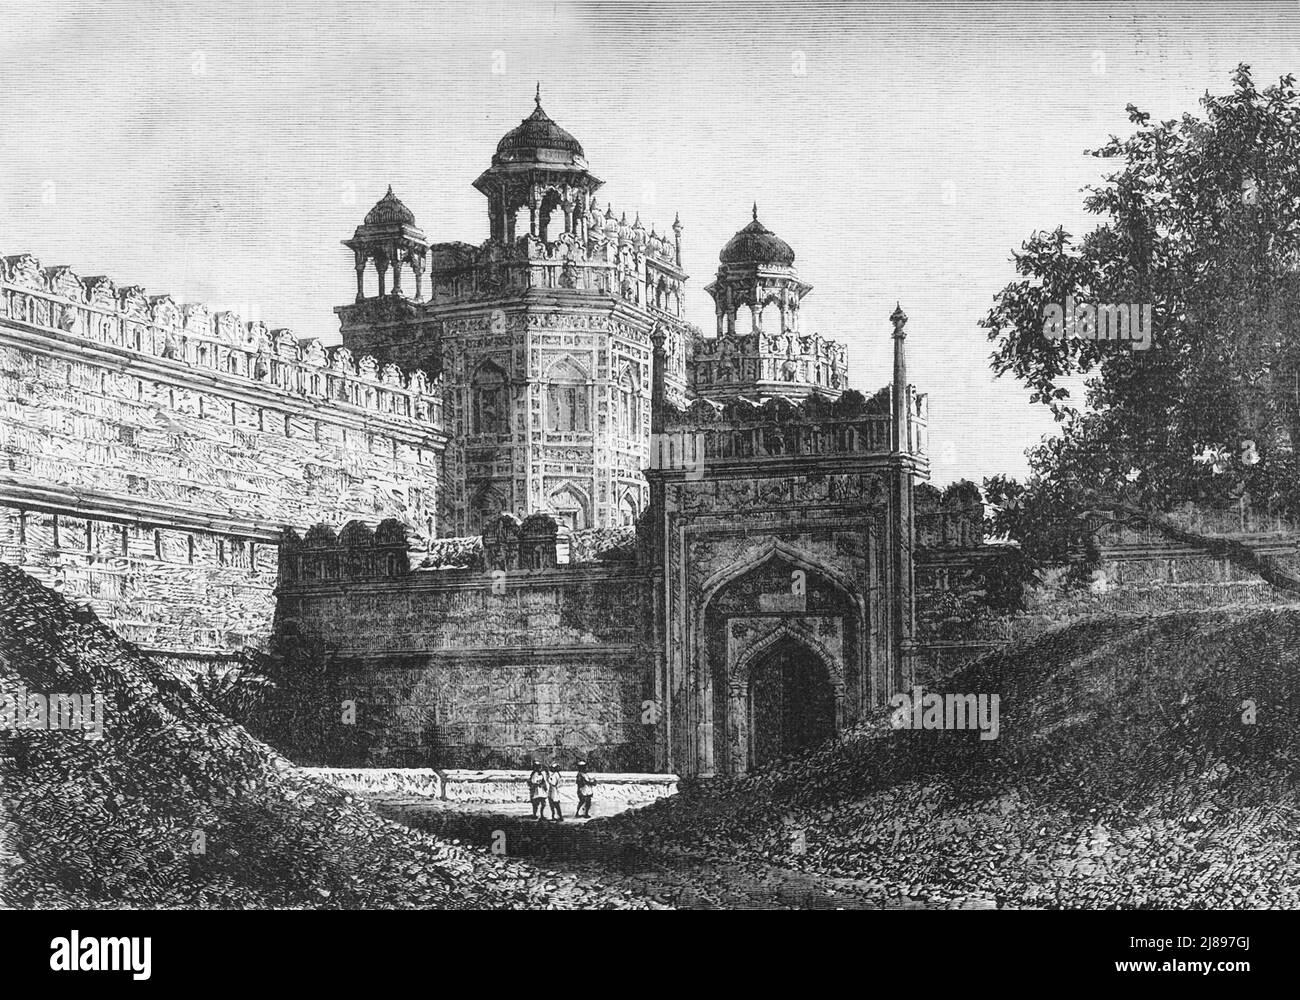 'View of the Principal Gate of the Palace of the Padishahs, Delhi', c1891. From &quot;Cassell's Illustrated History of India Vol. II.&quot;, by James Grant. [Cassell Petter &amp; Galpin, London, Paris and New York] Stock Photo